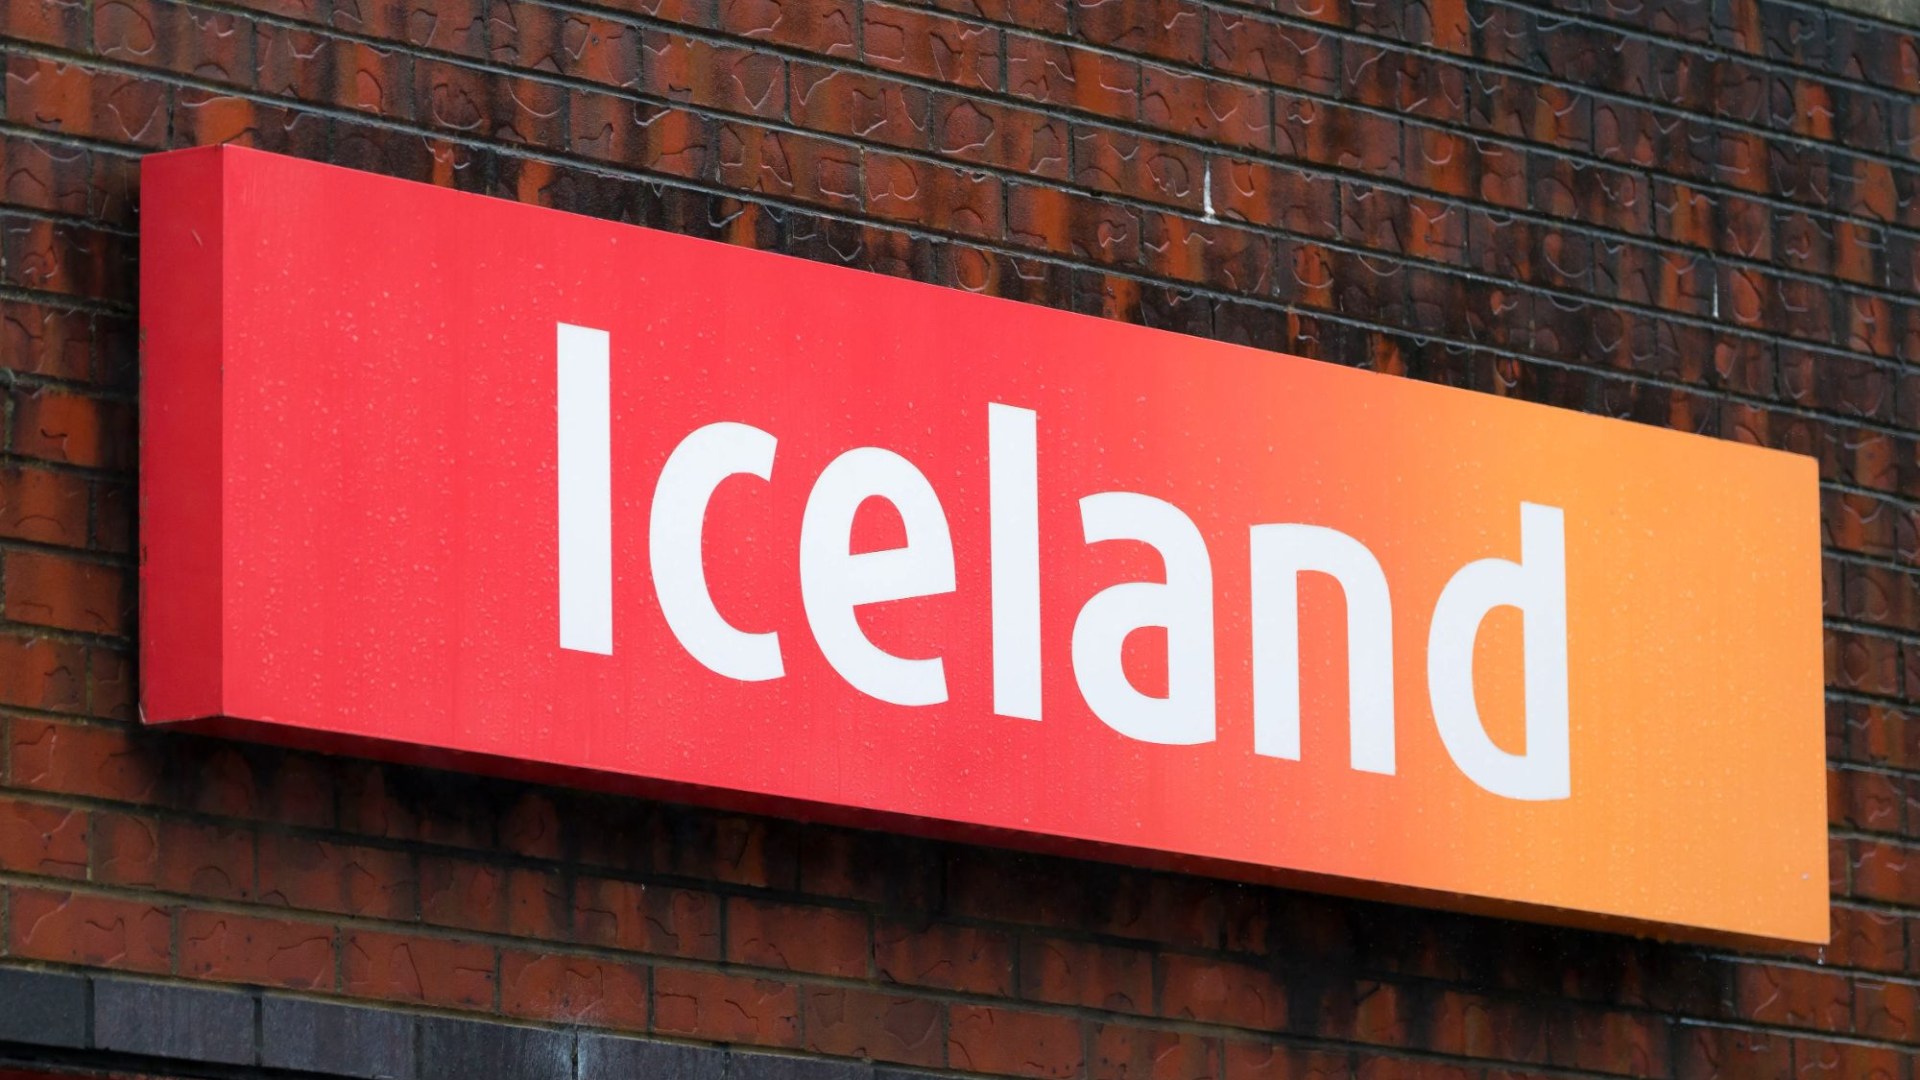 ‘I need these’ cry shoppers as they spot ‘Dream Team’ boxes of iconic ice lollies at Iceland in time for summer [Video]